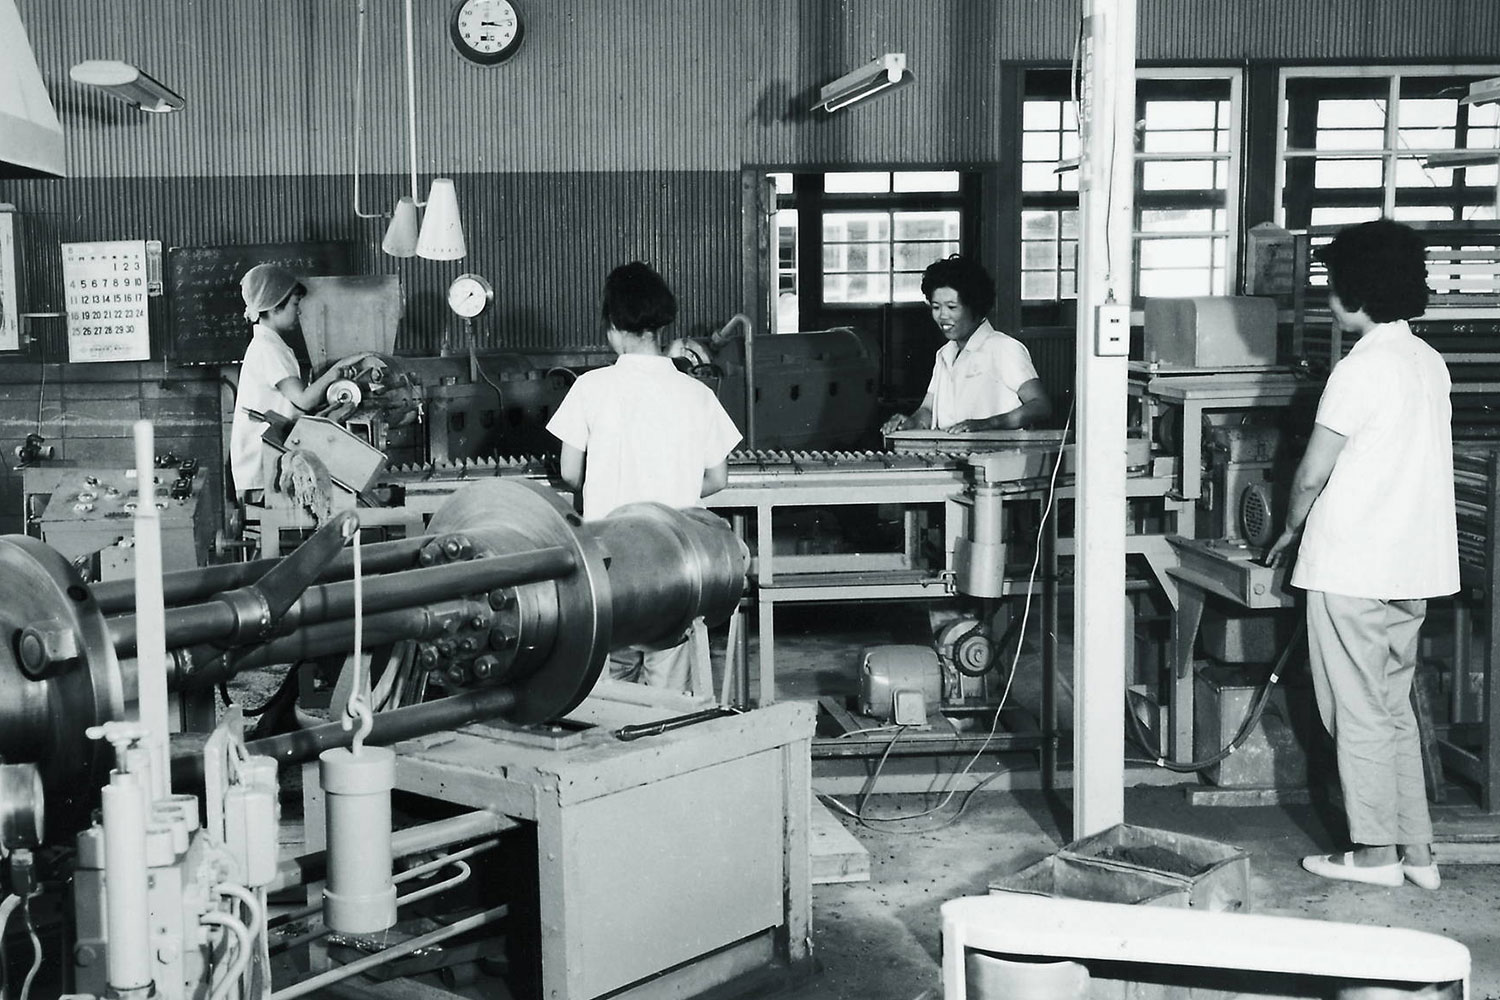 Manufacturing process in the 60s